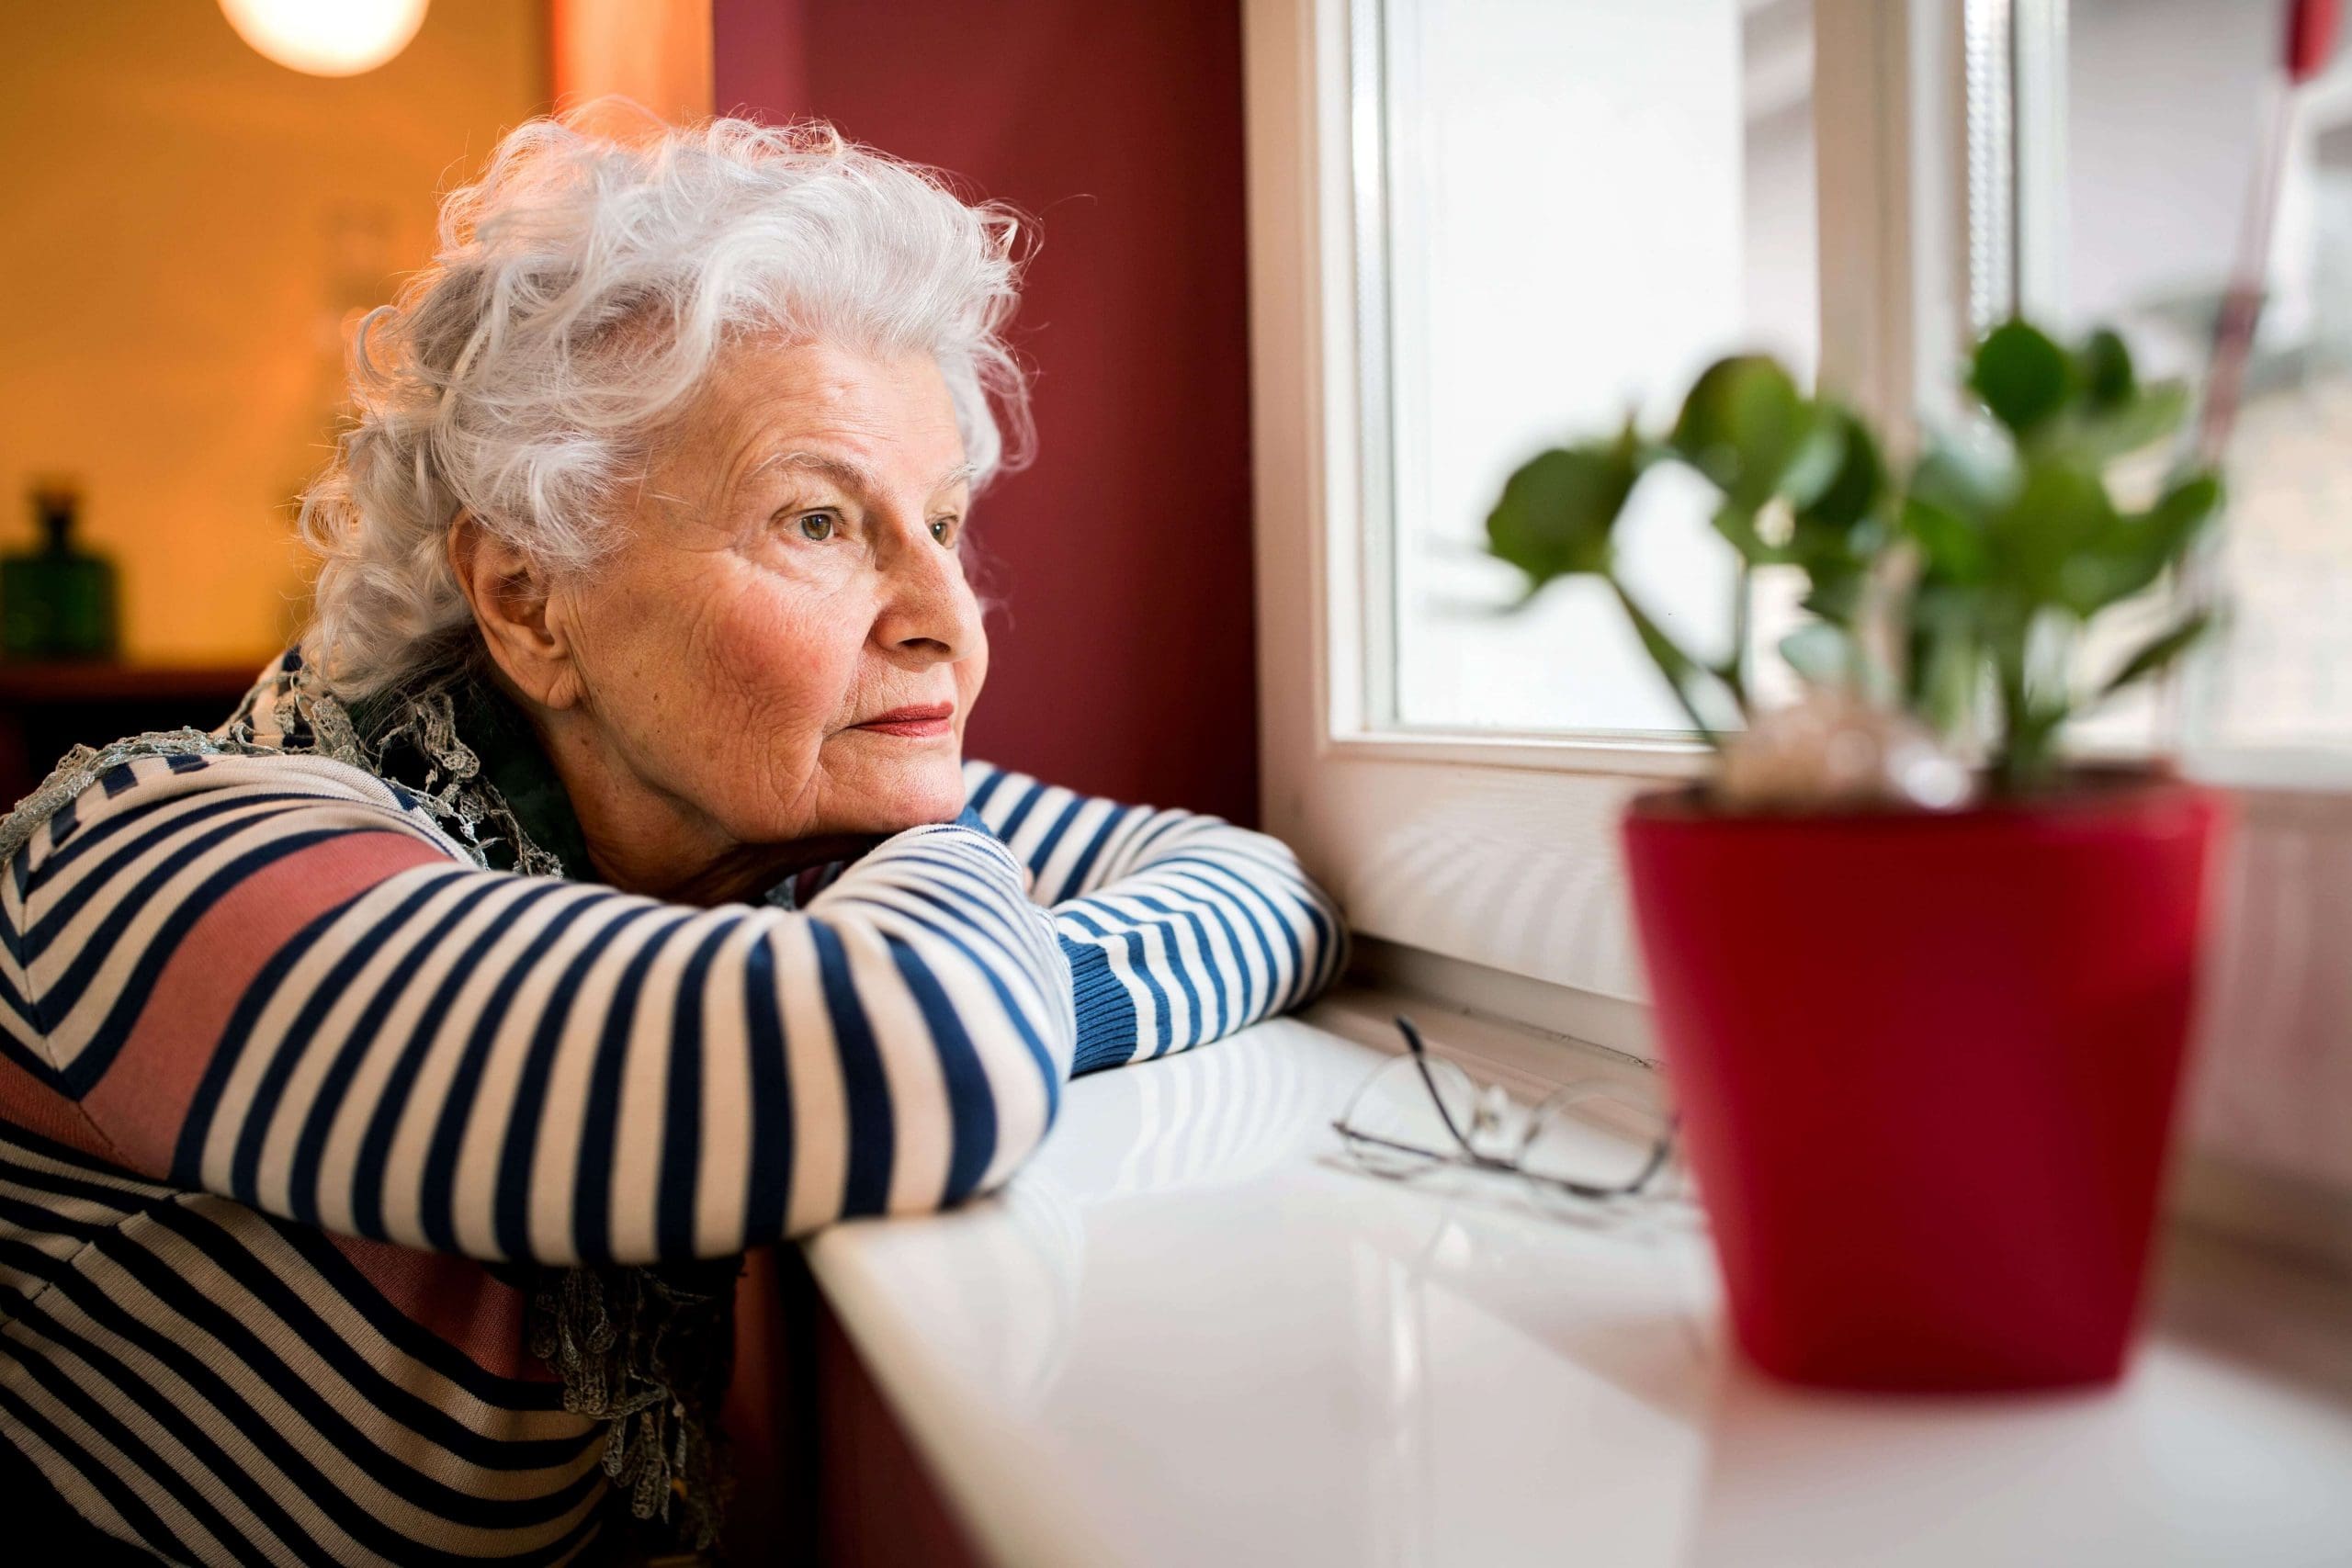 Elderly woman staring longingly out a window